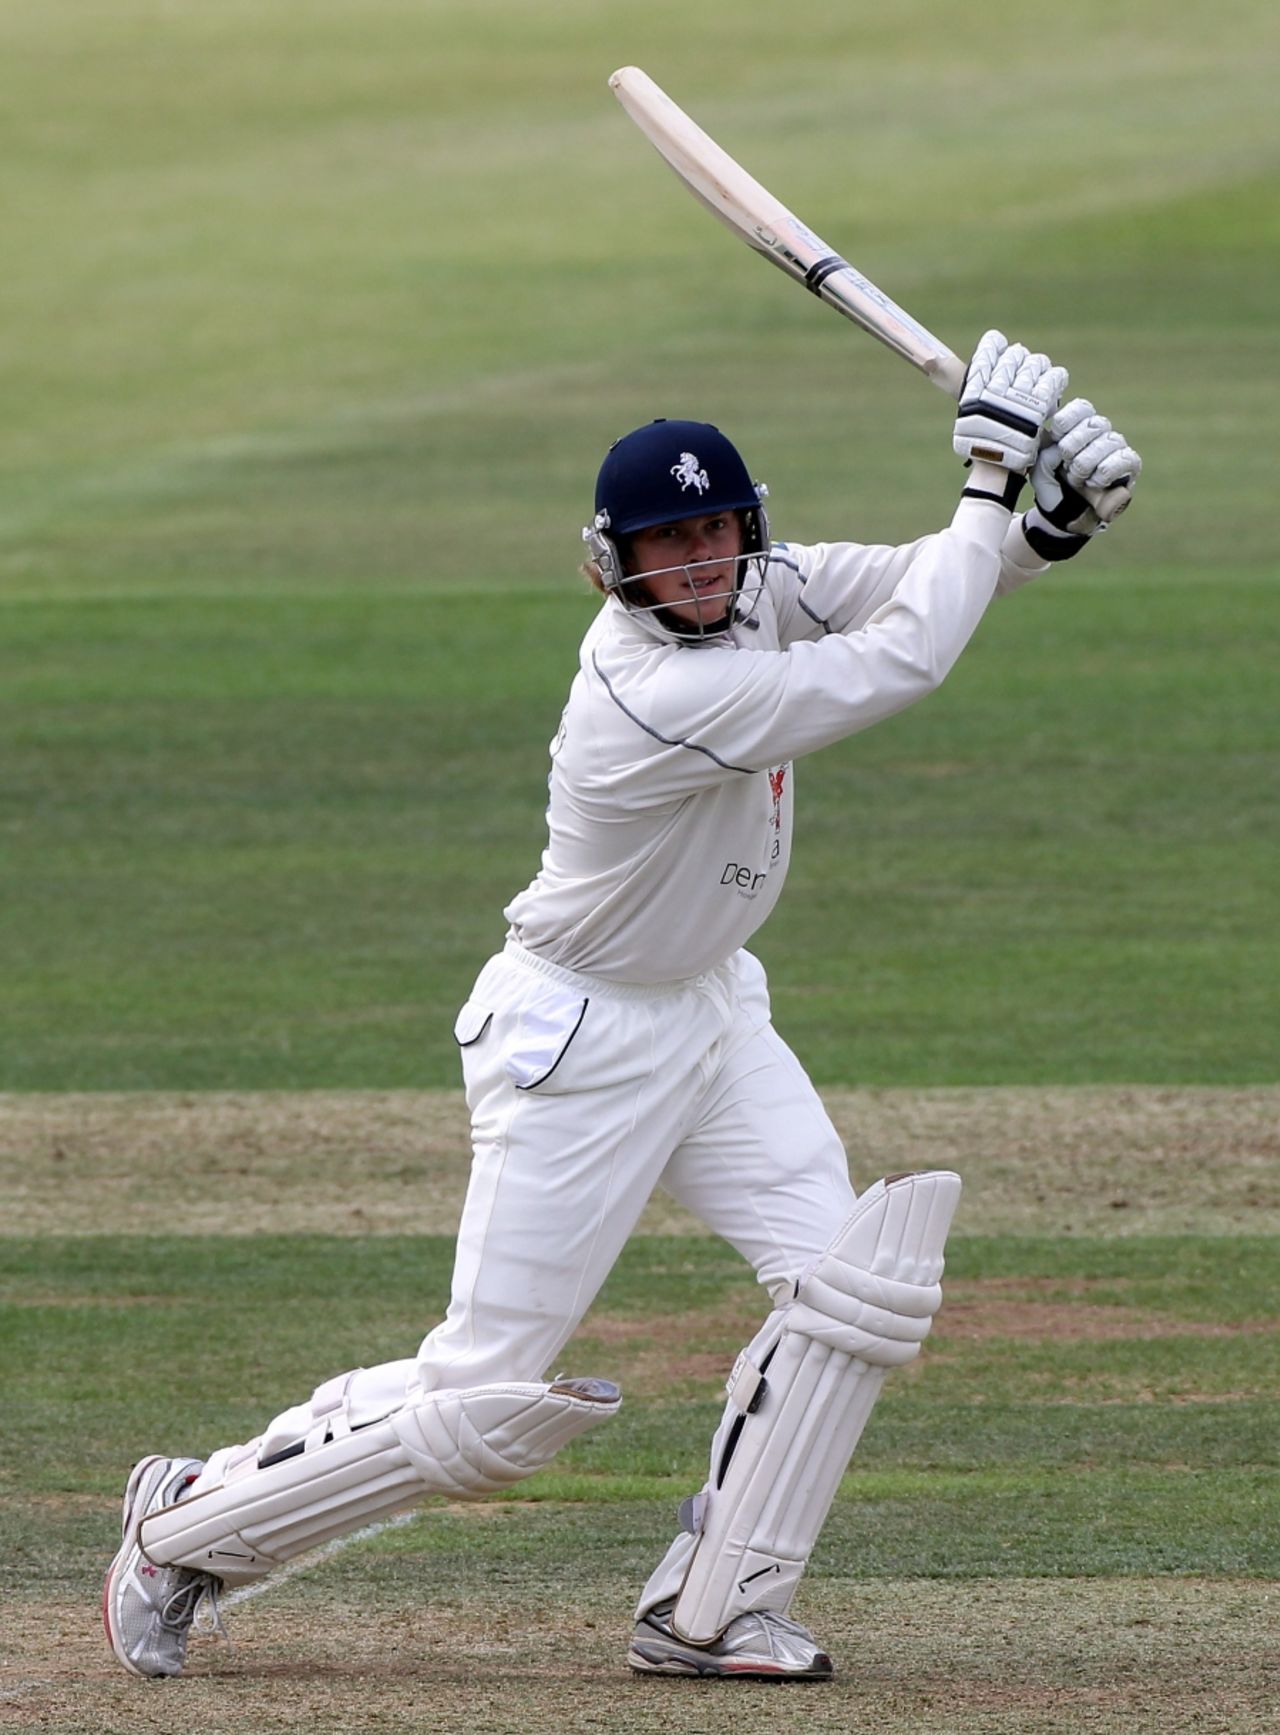 Sam Northeast made 50 before he was dismissed by David Balcombe, Hampshire v Kent, County Championship Division One, Southampton, July 5, 2010